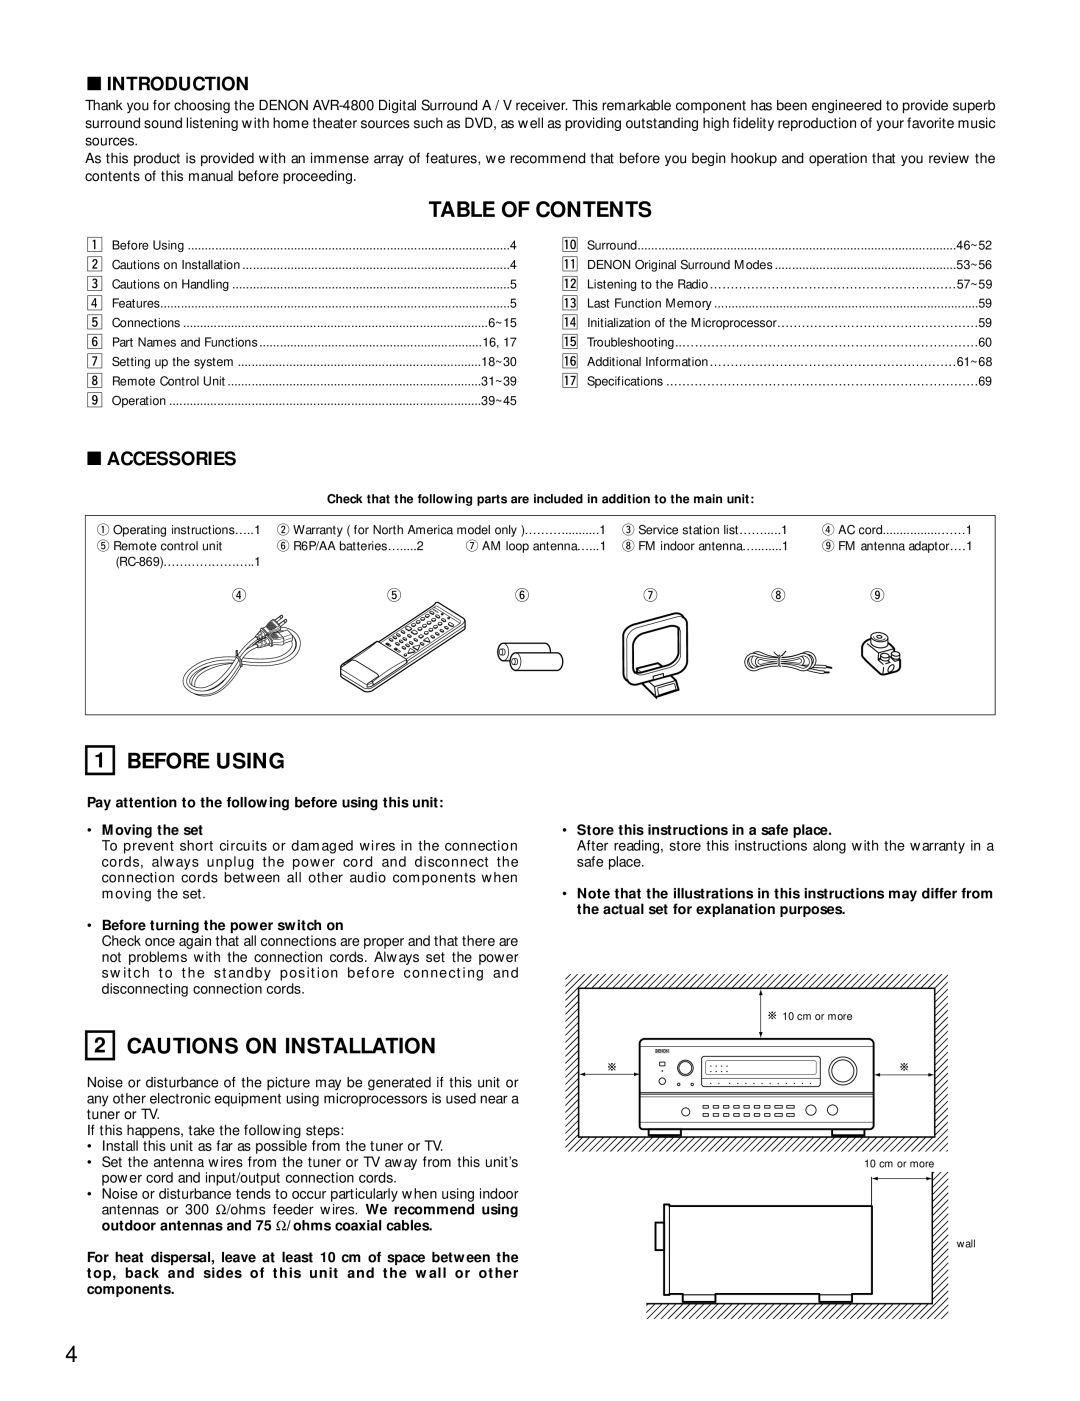 Denon AVR-4800 Table Of Contents, Before Using, Cautions On Installation, 2INTRODUCTION, 2ACCESSORIES, •Moving the set 